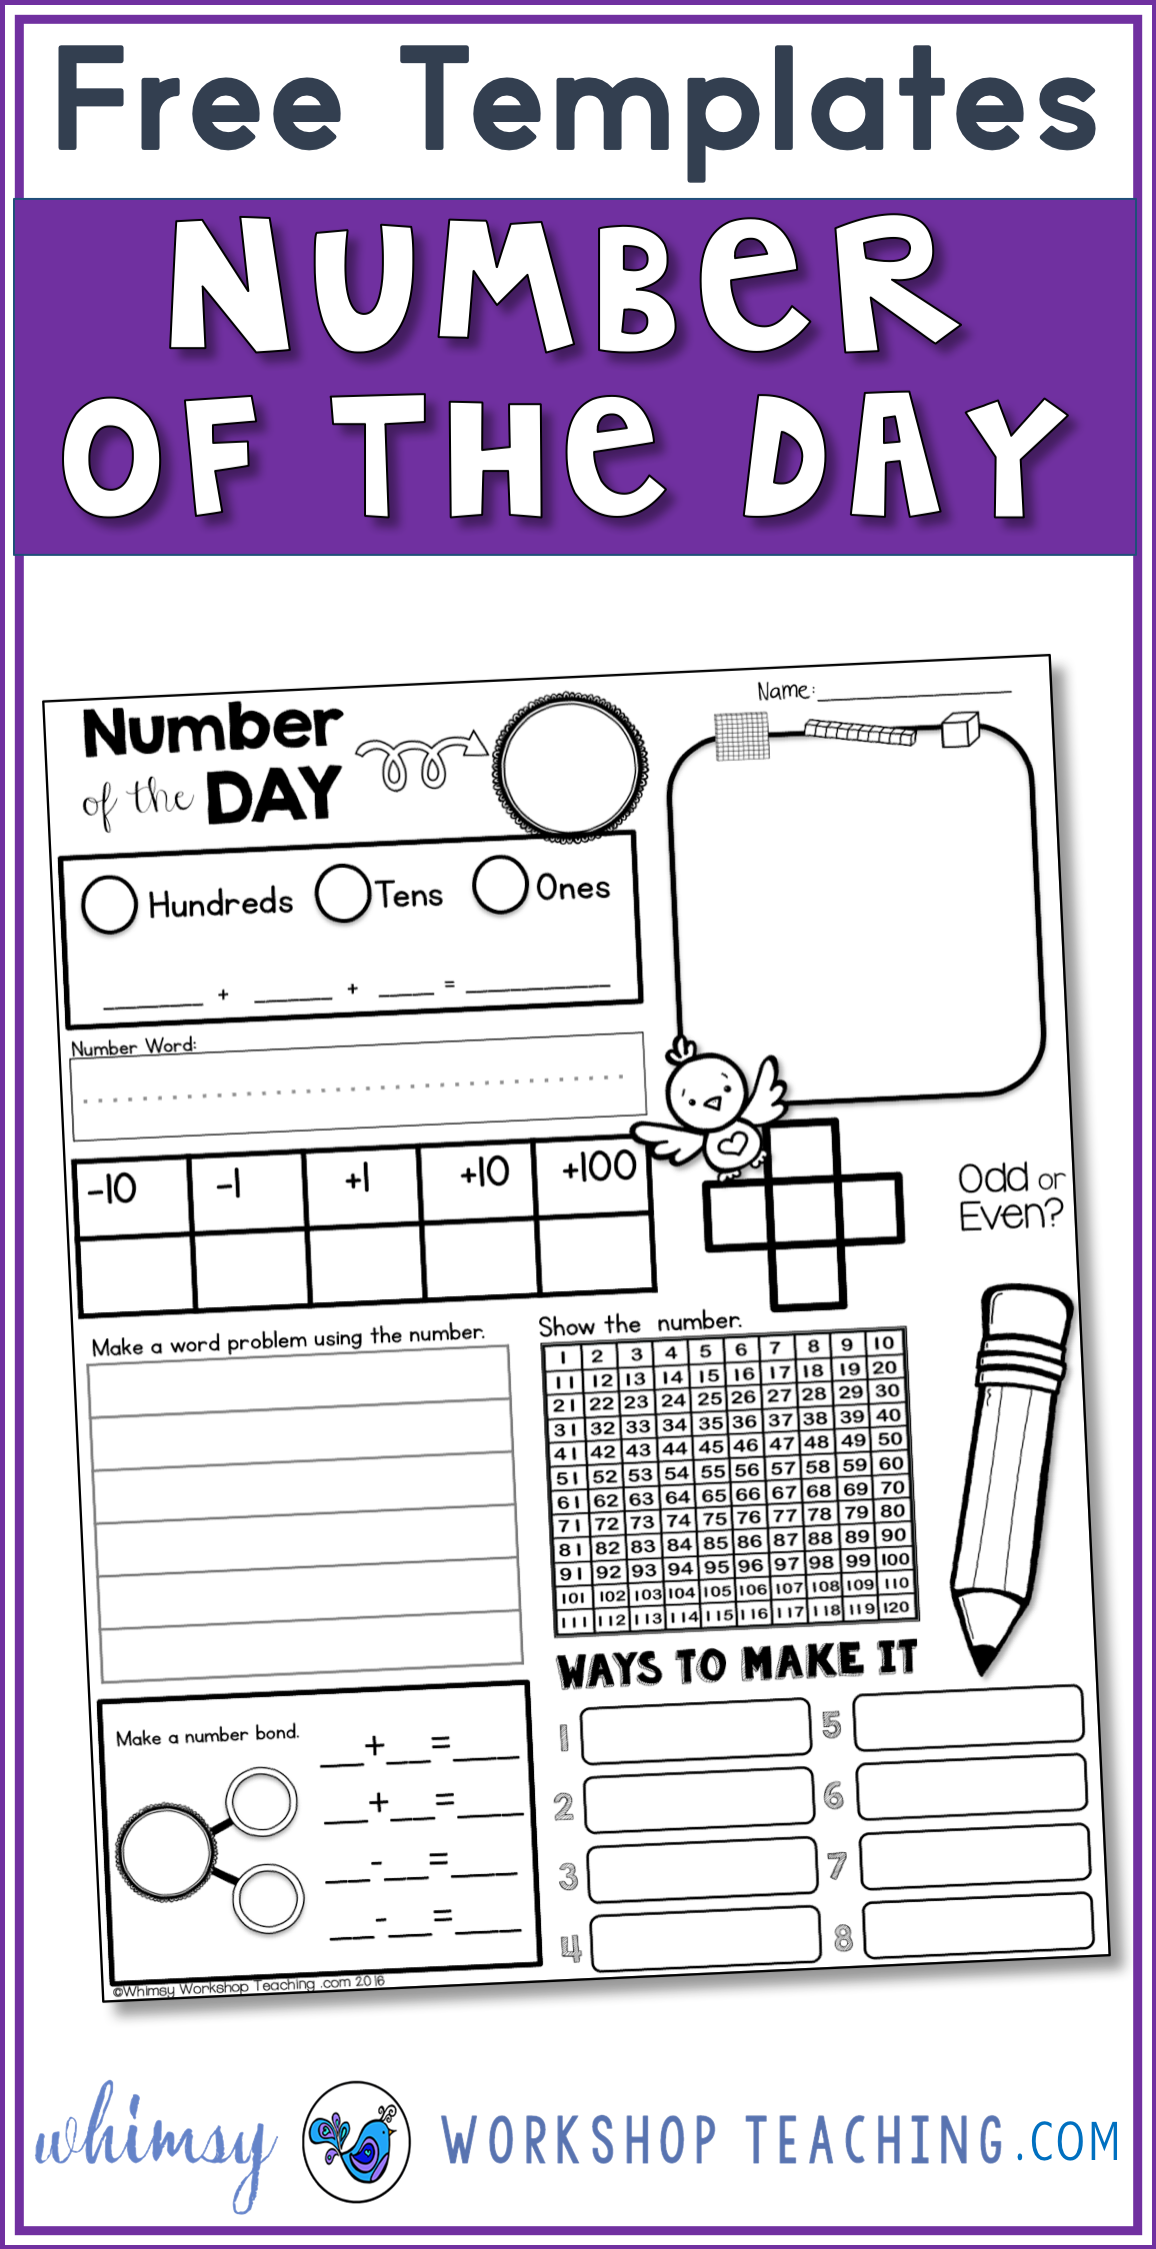 use-these-free-number-of-the-day-templates-every-day-with-a-different